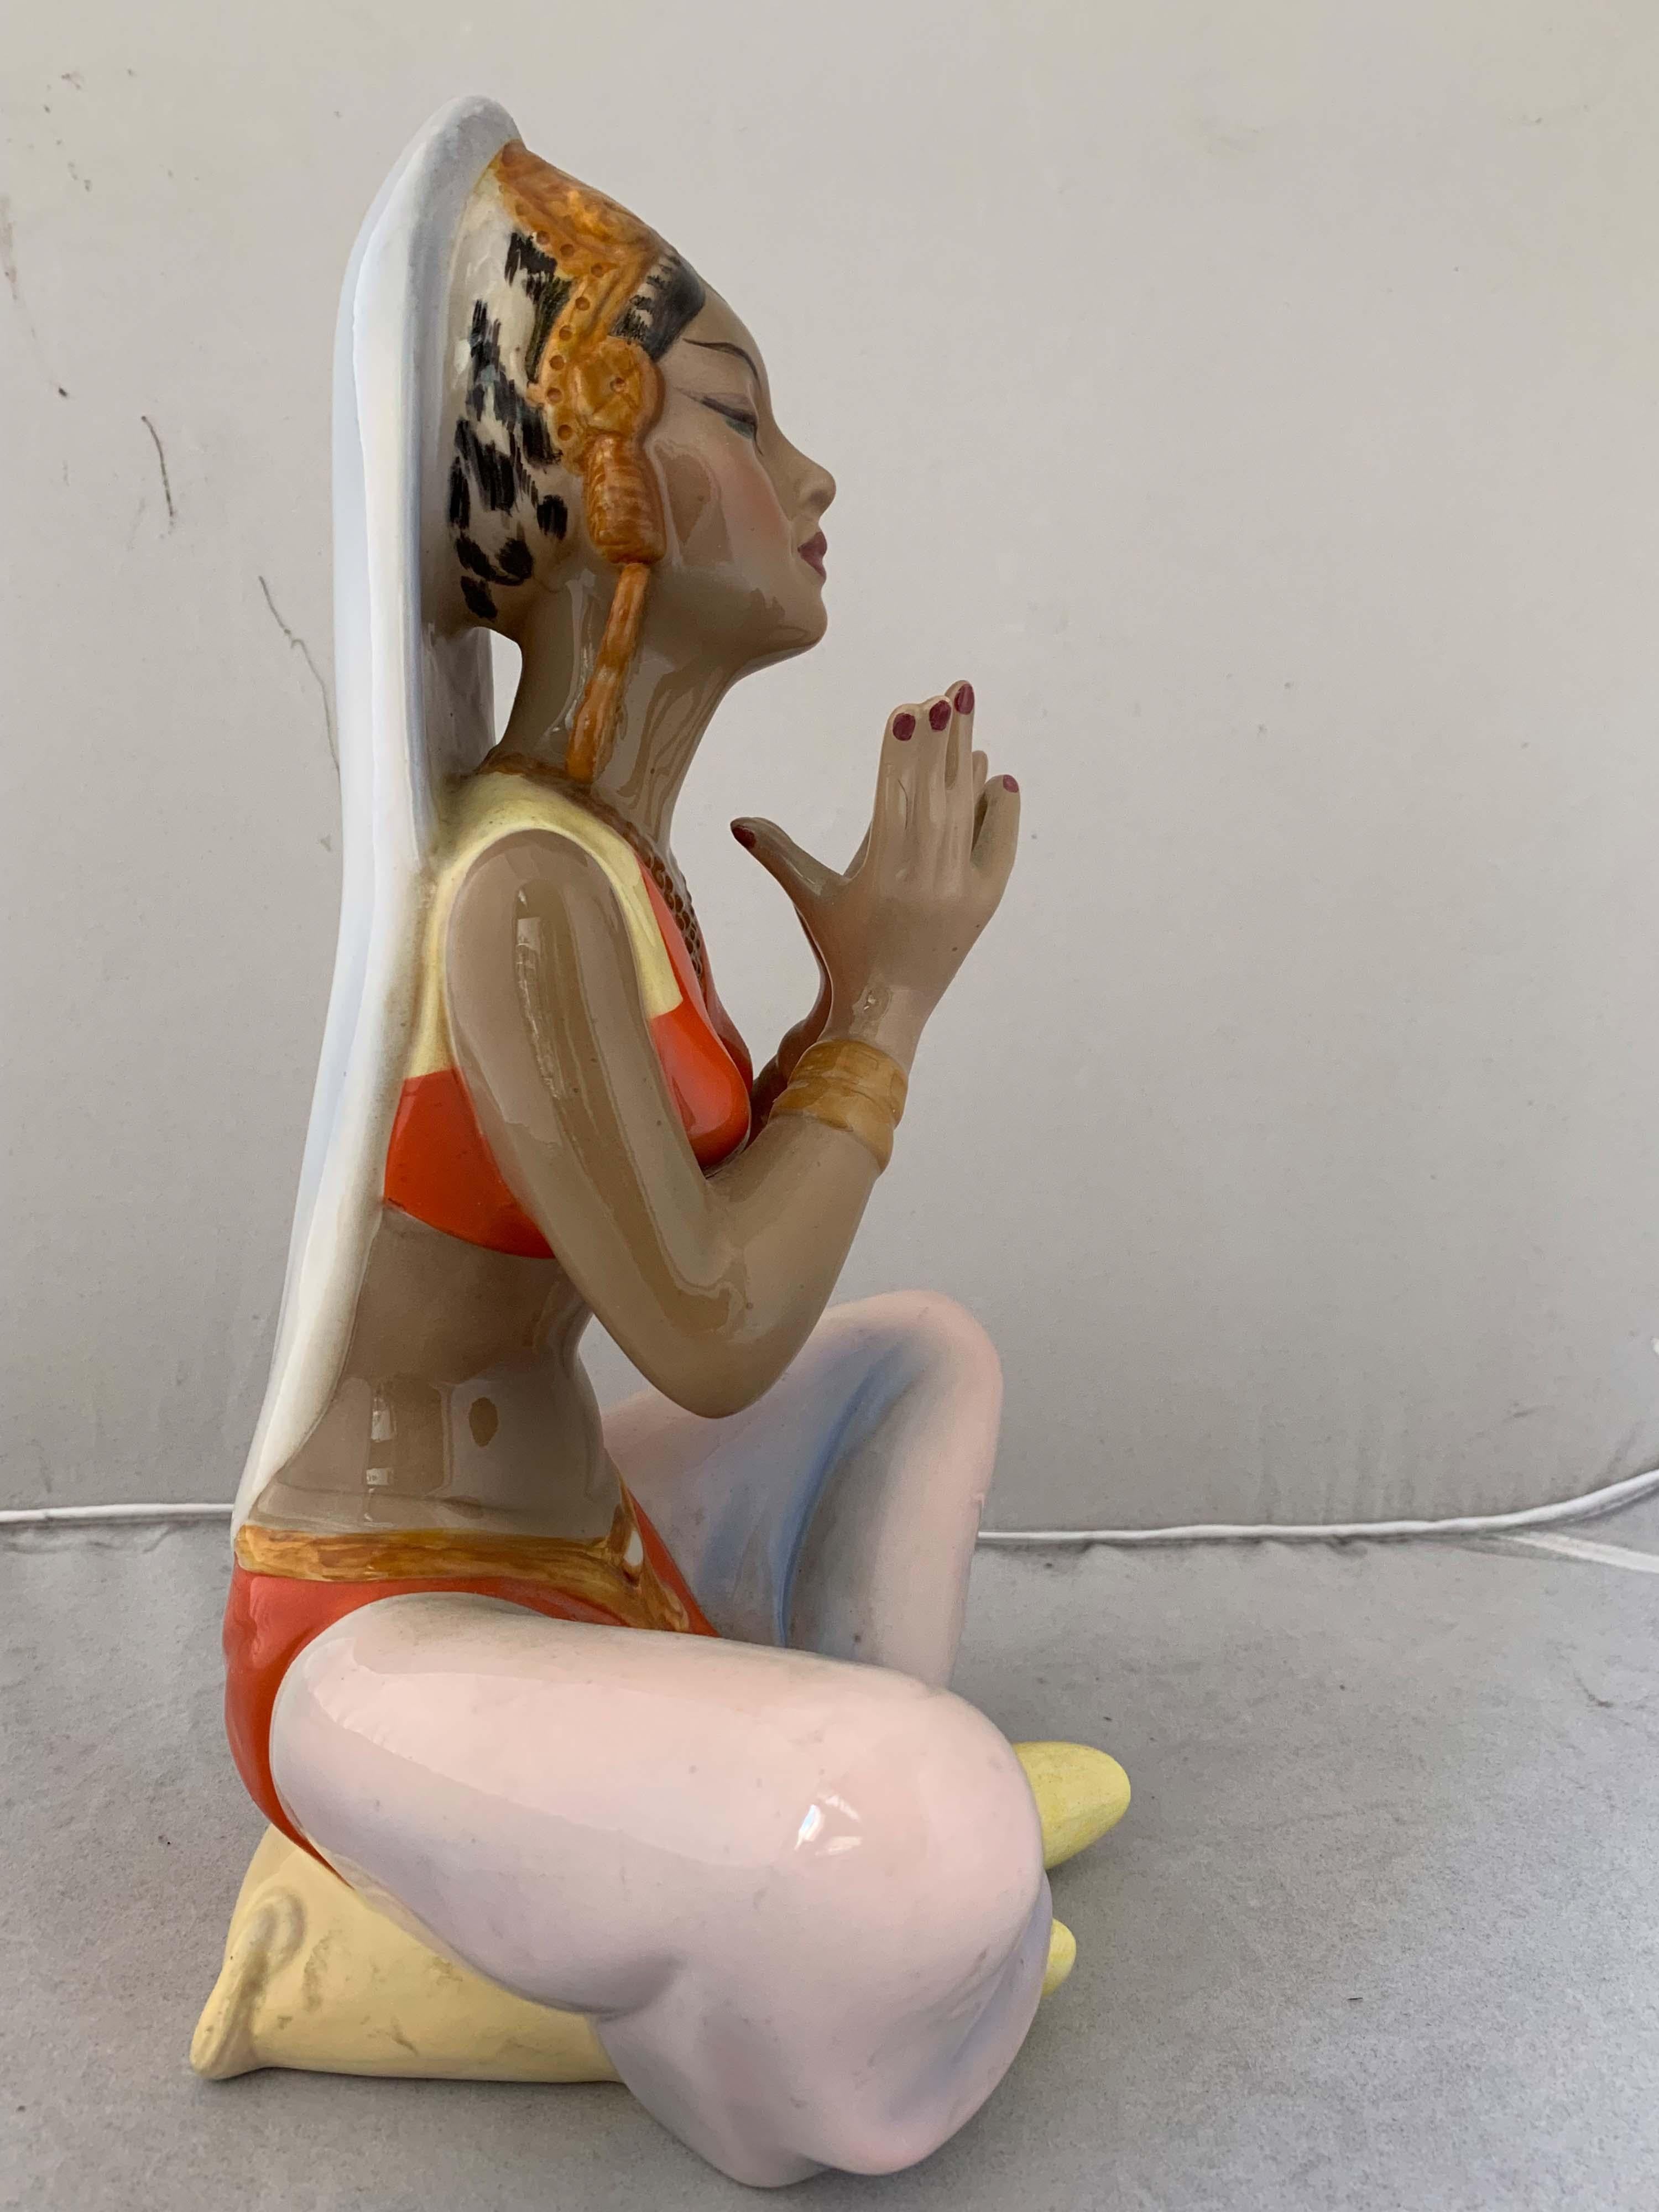 Figure of a Girl in a Meditative Pose by Caterina Manna for C.I.A. Manna Torino 1